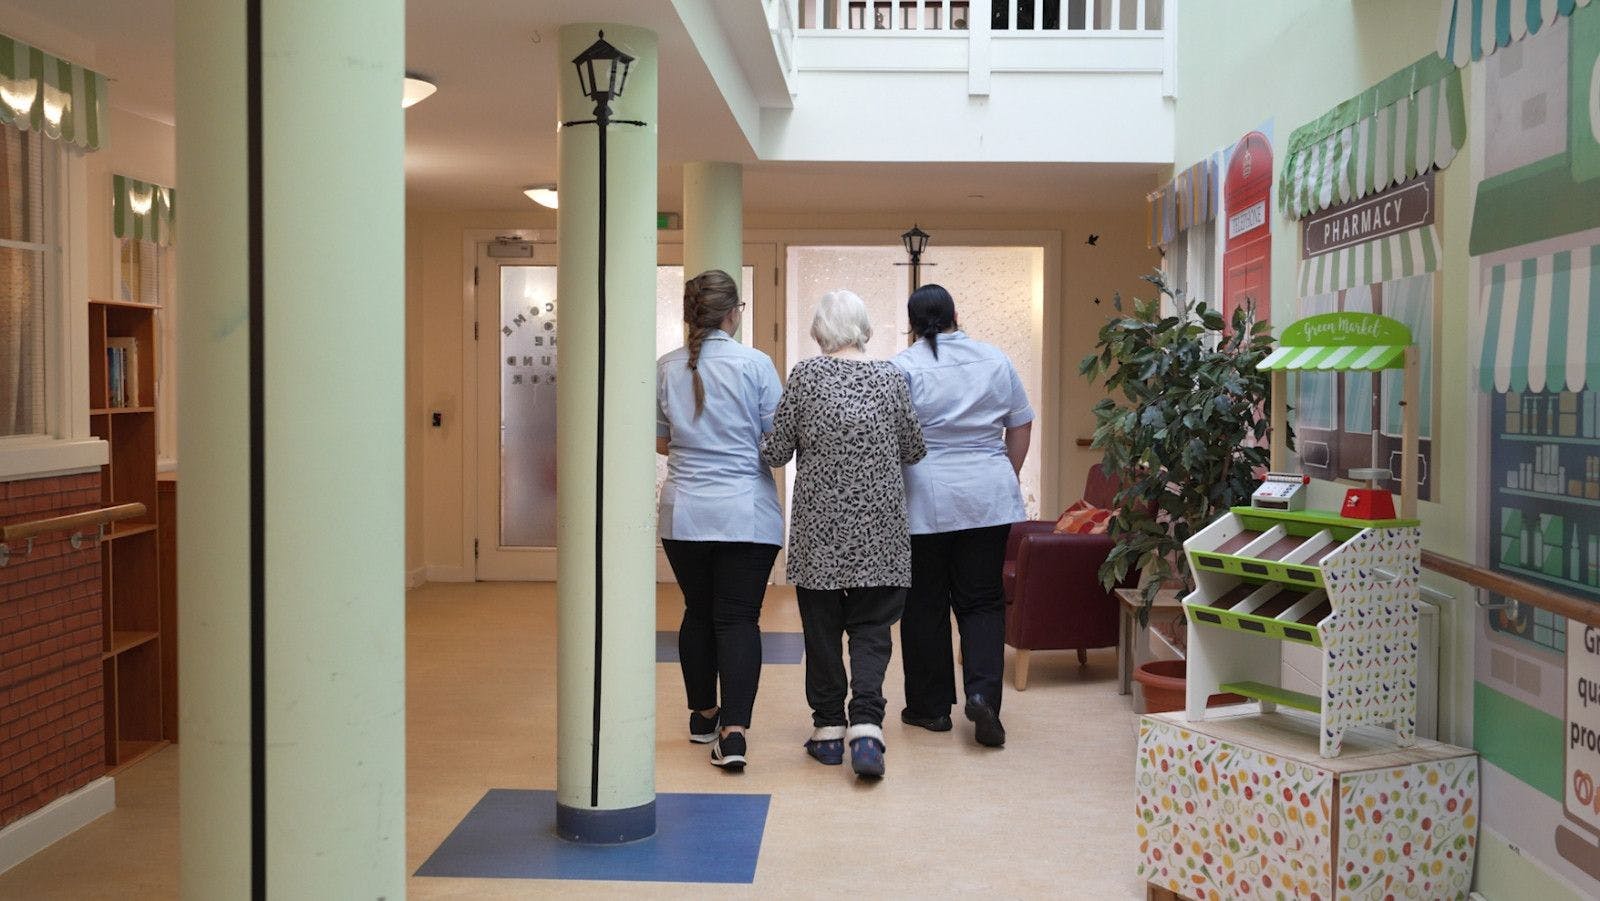 Shaw Healthcare - Deerswood Lodge care home 002